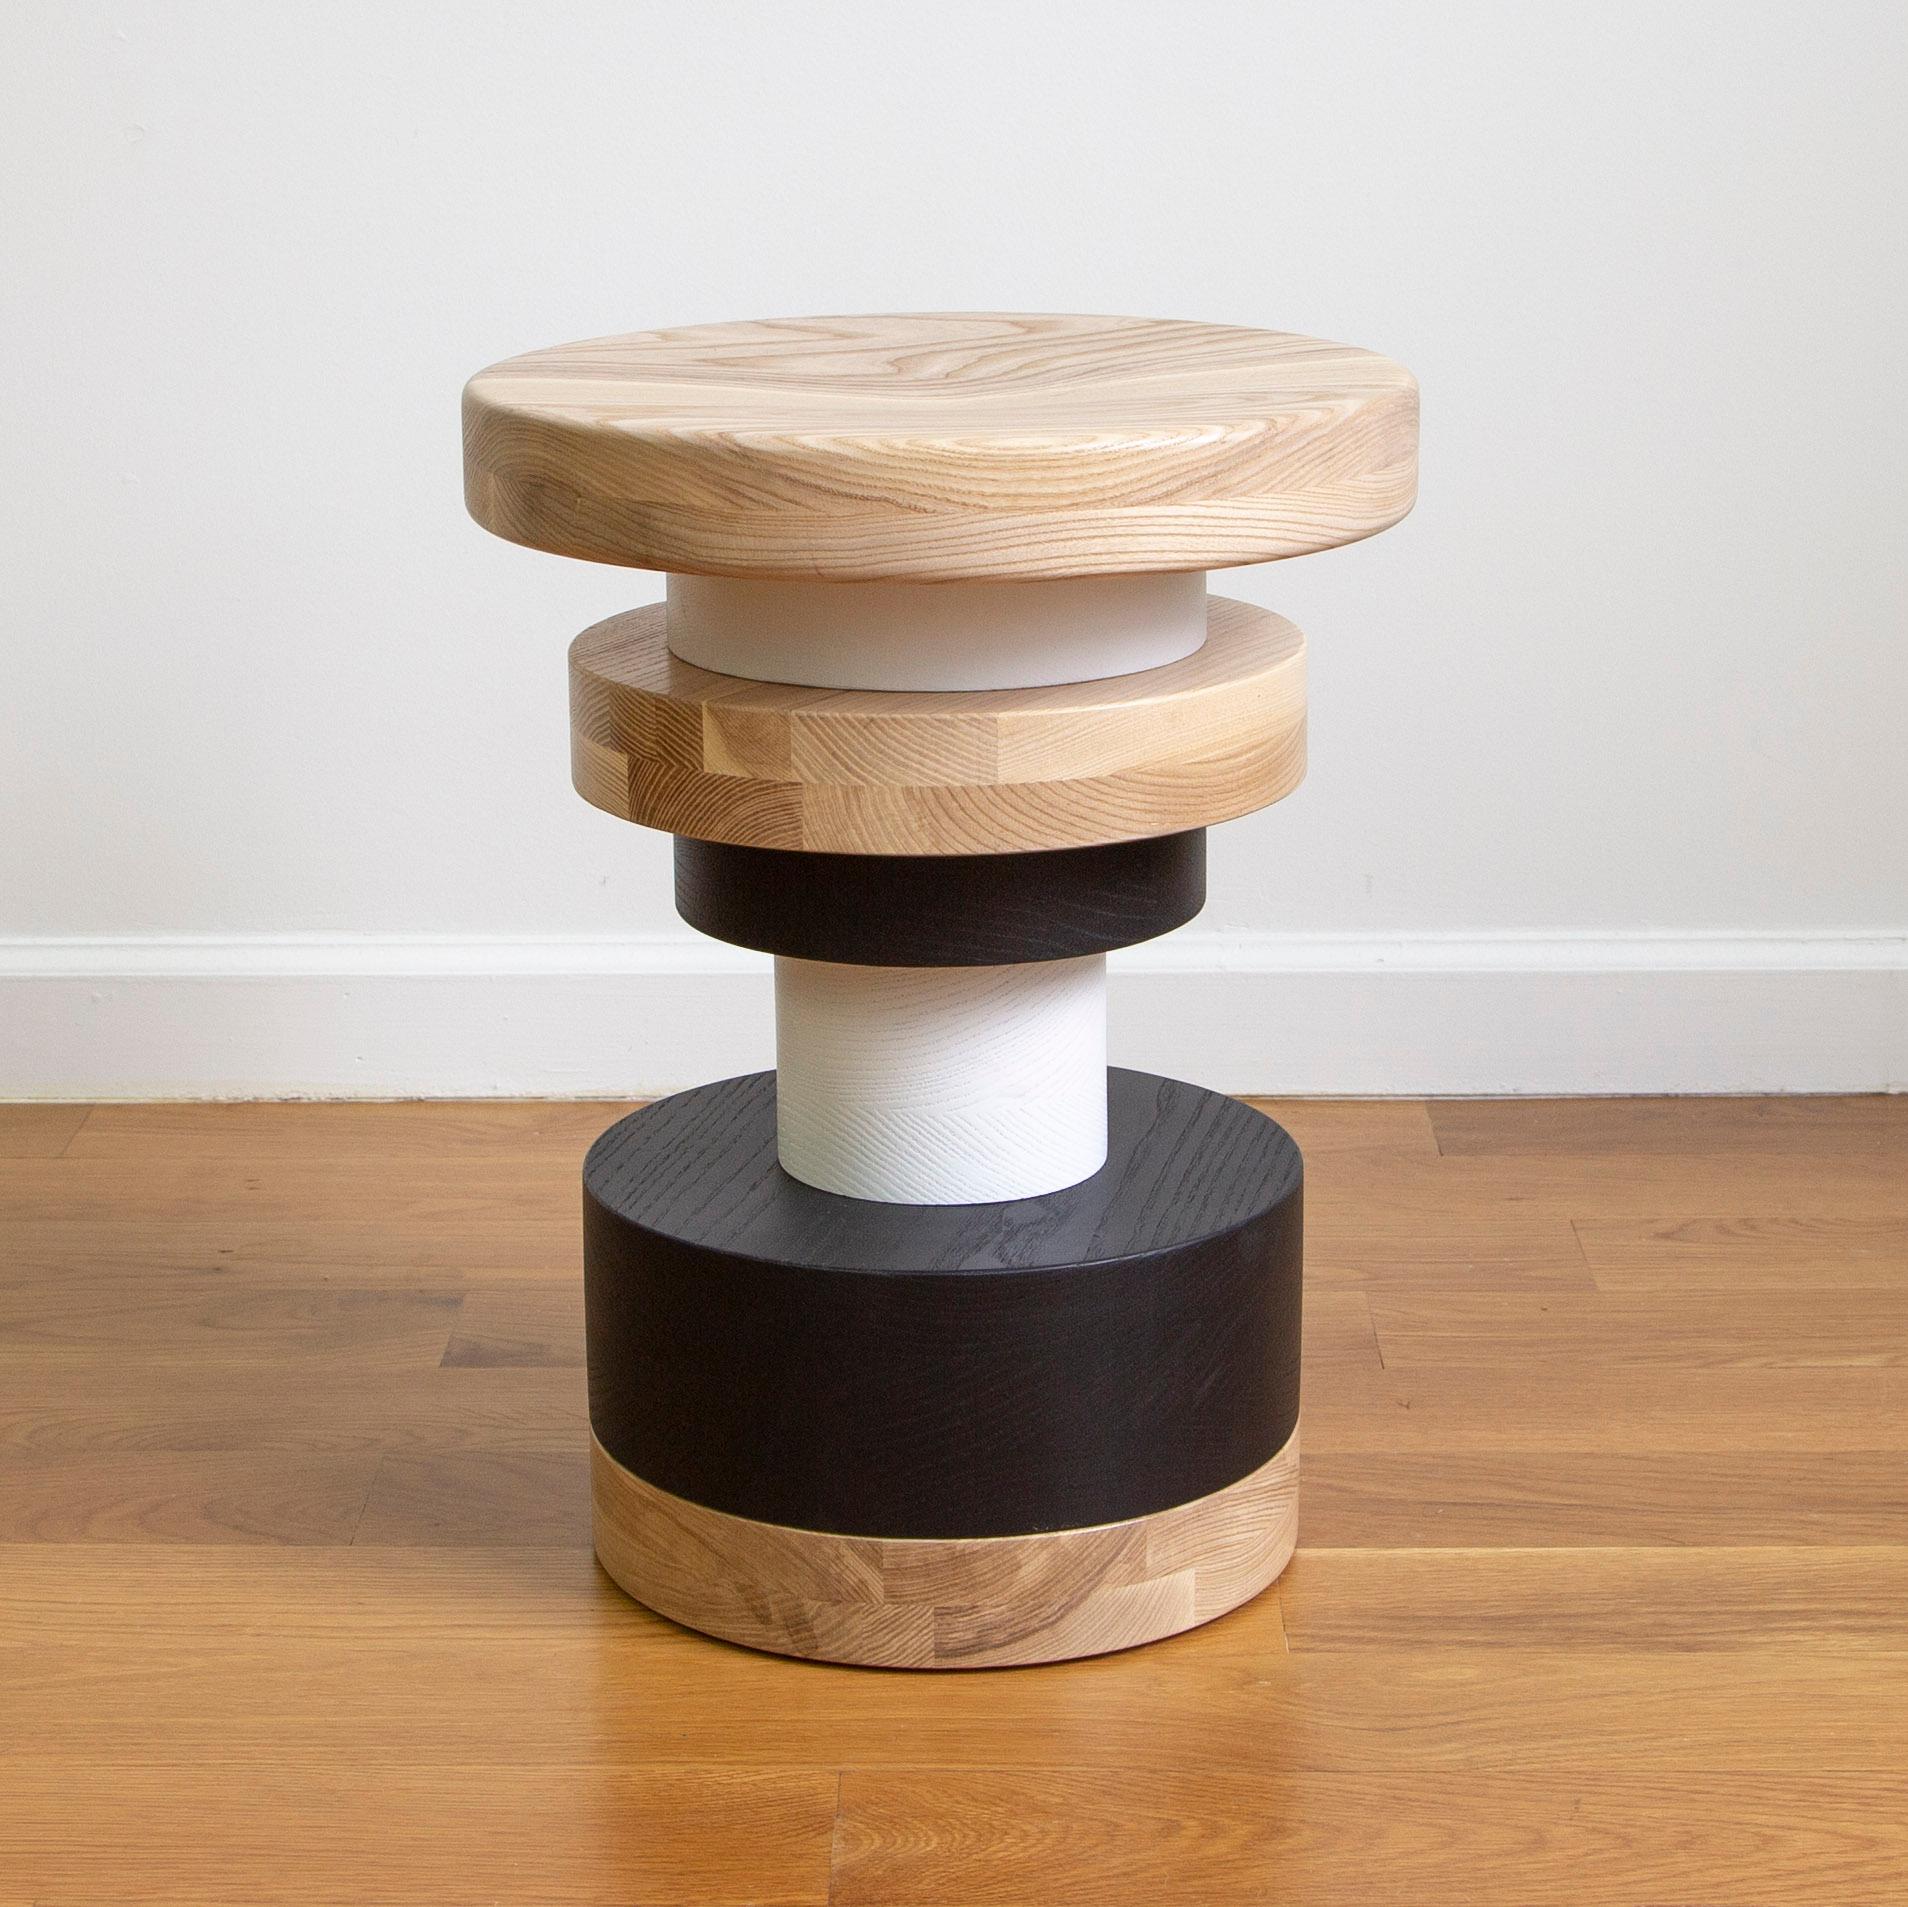 This listing is for 2 sass stool from Souda. We offer three different shapes (A, B, & C). This listing is for 'B' and 'C', which are shown in the first image.

The Sottsass inspired “Sass Stools” are simple, sculptural accents for any interior